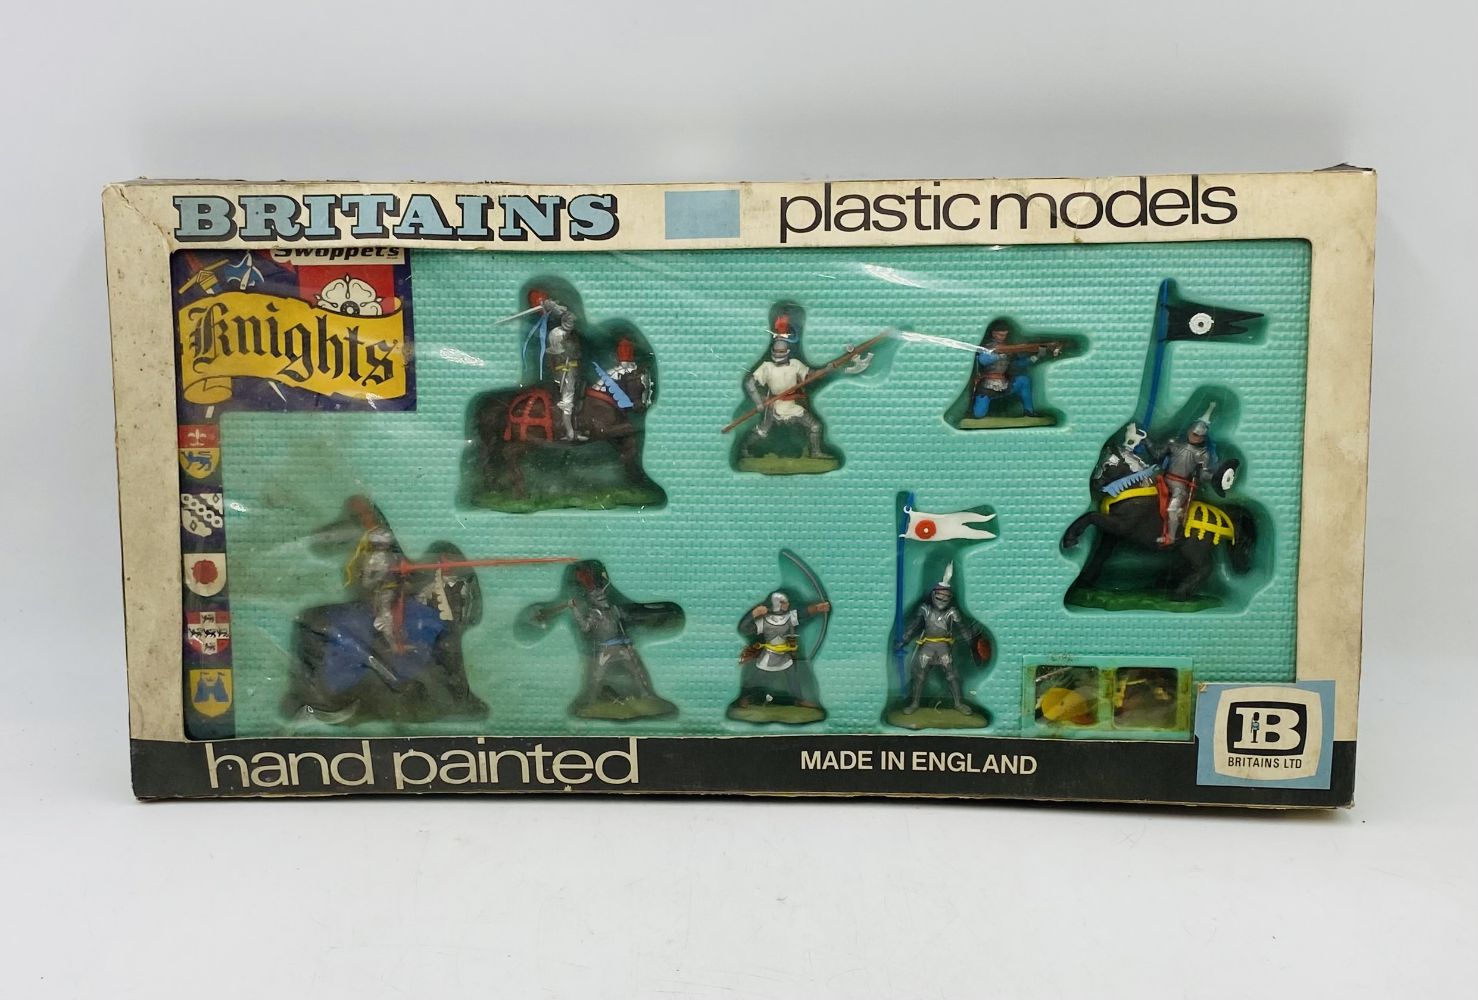 Sale of Vintage Collectable Toys and Models